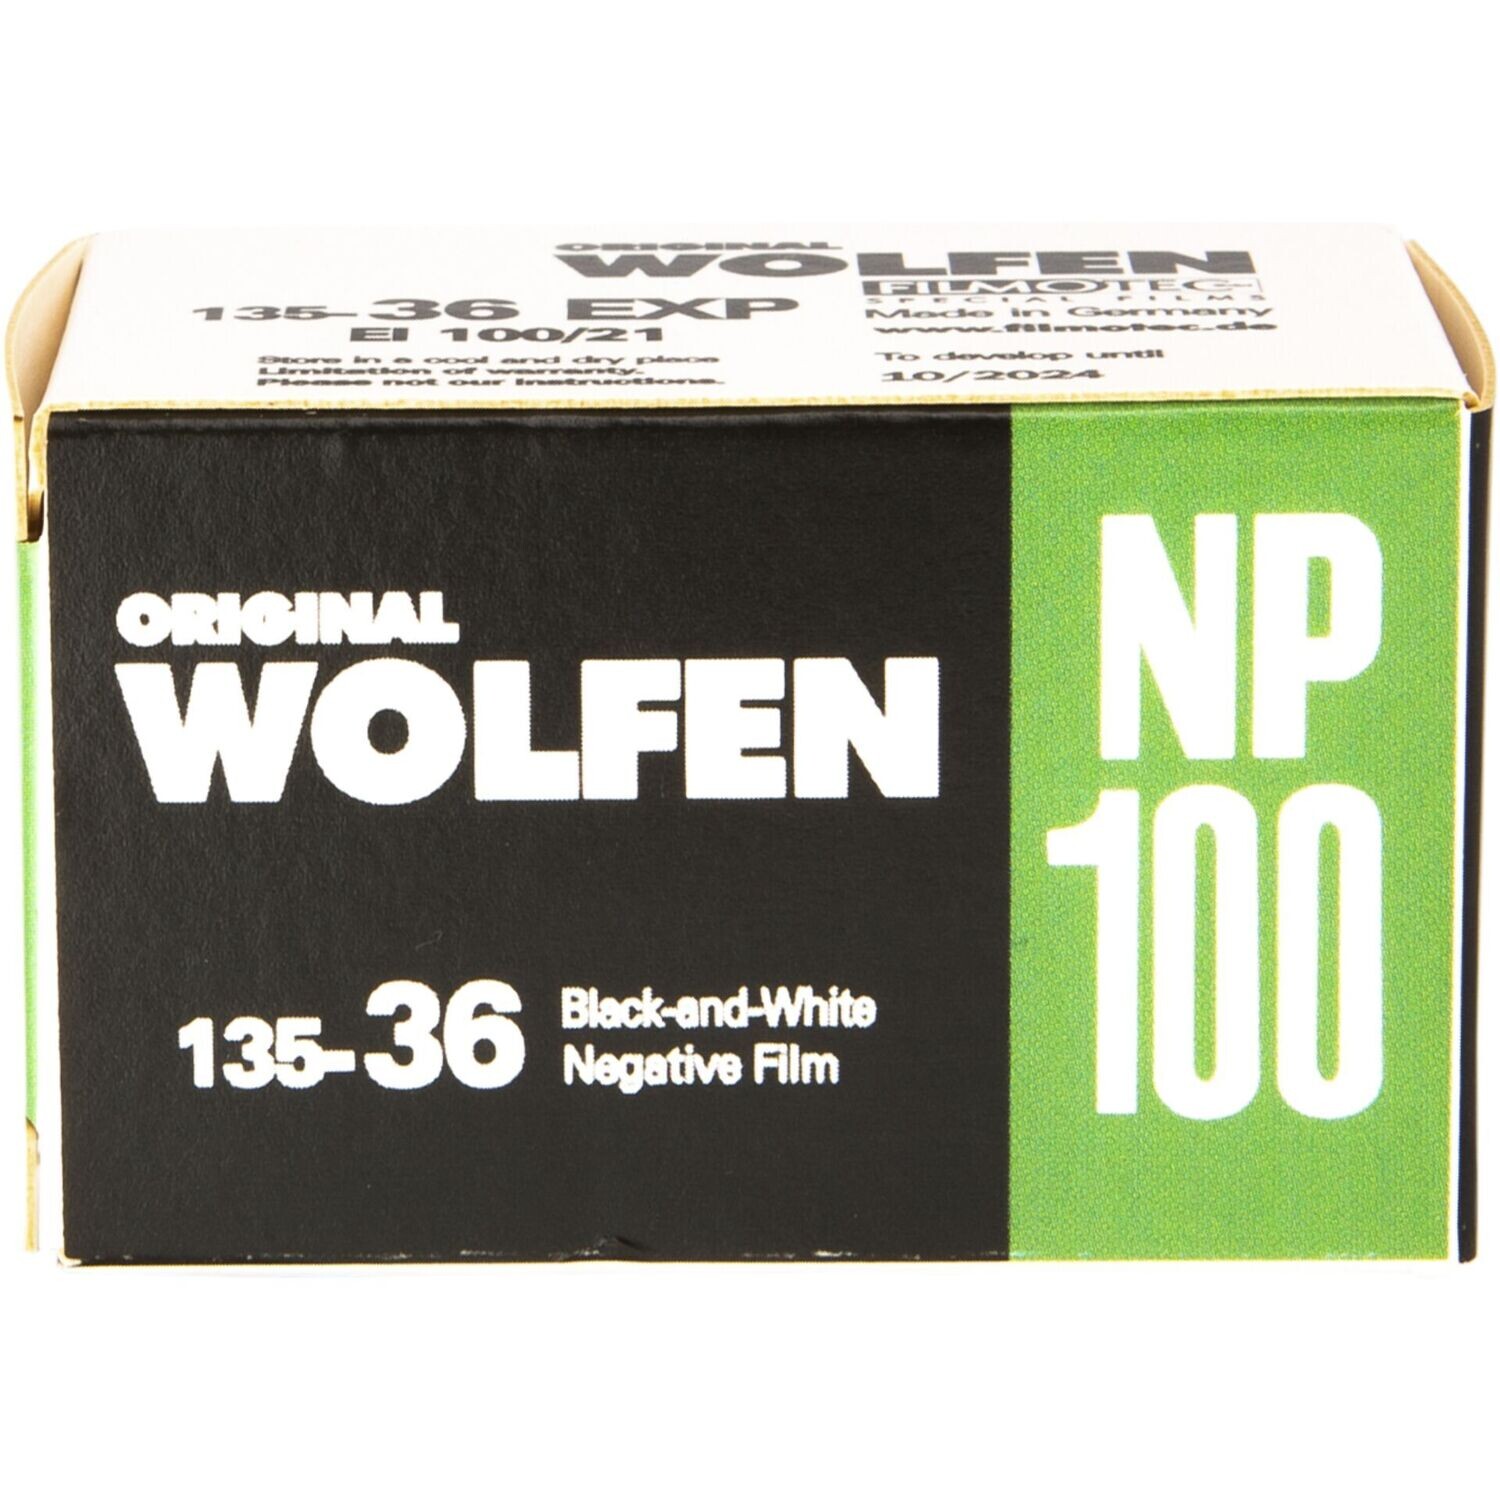 ORWO WOLFEN NP100 is an exceptionally fine grain, 100 ASA, 36 exposure black and white photographic film. (available from approx. 10.08.2023)